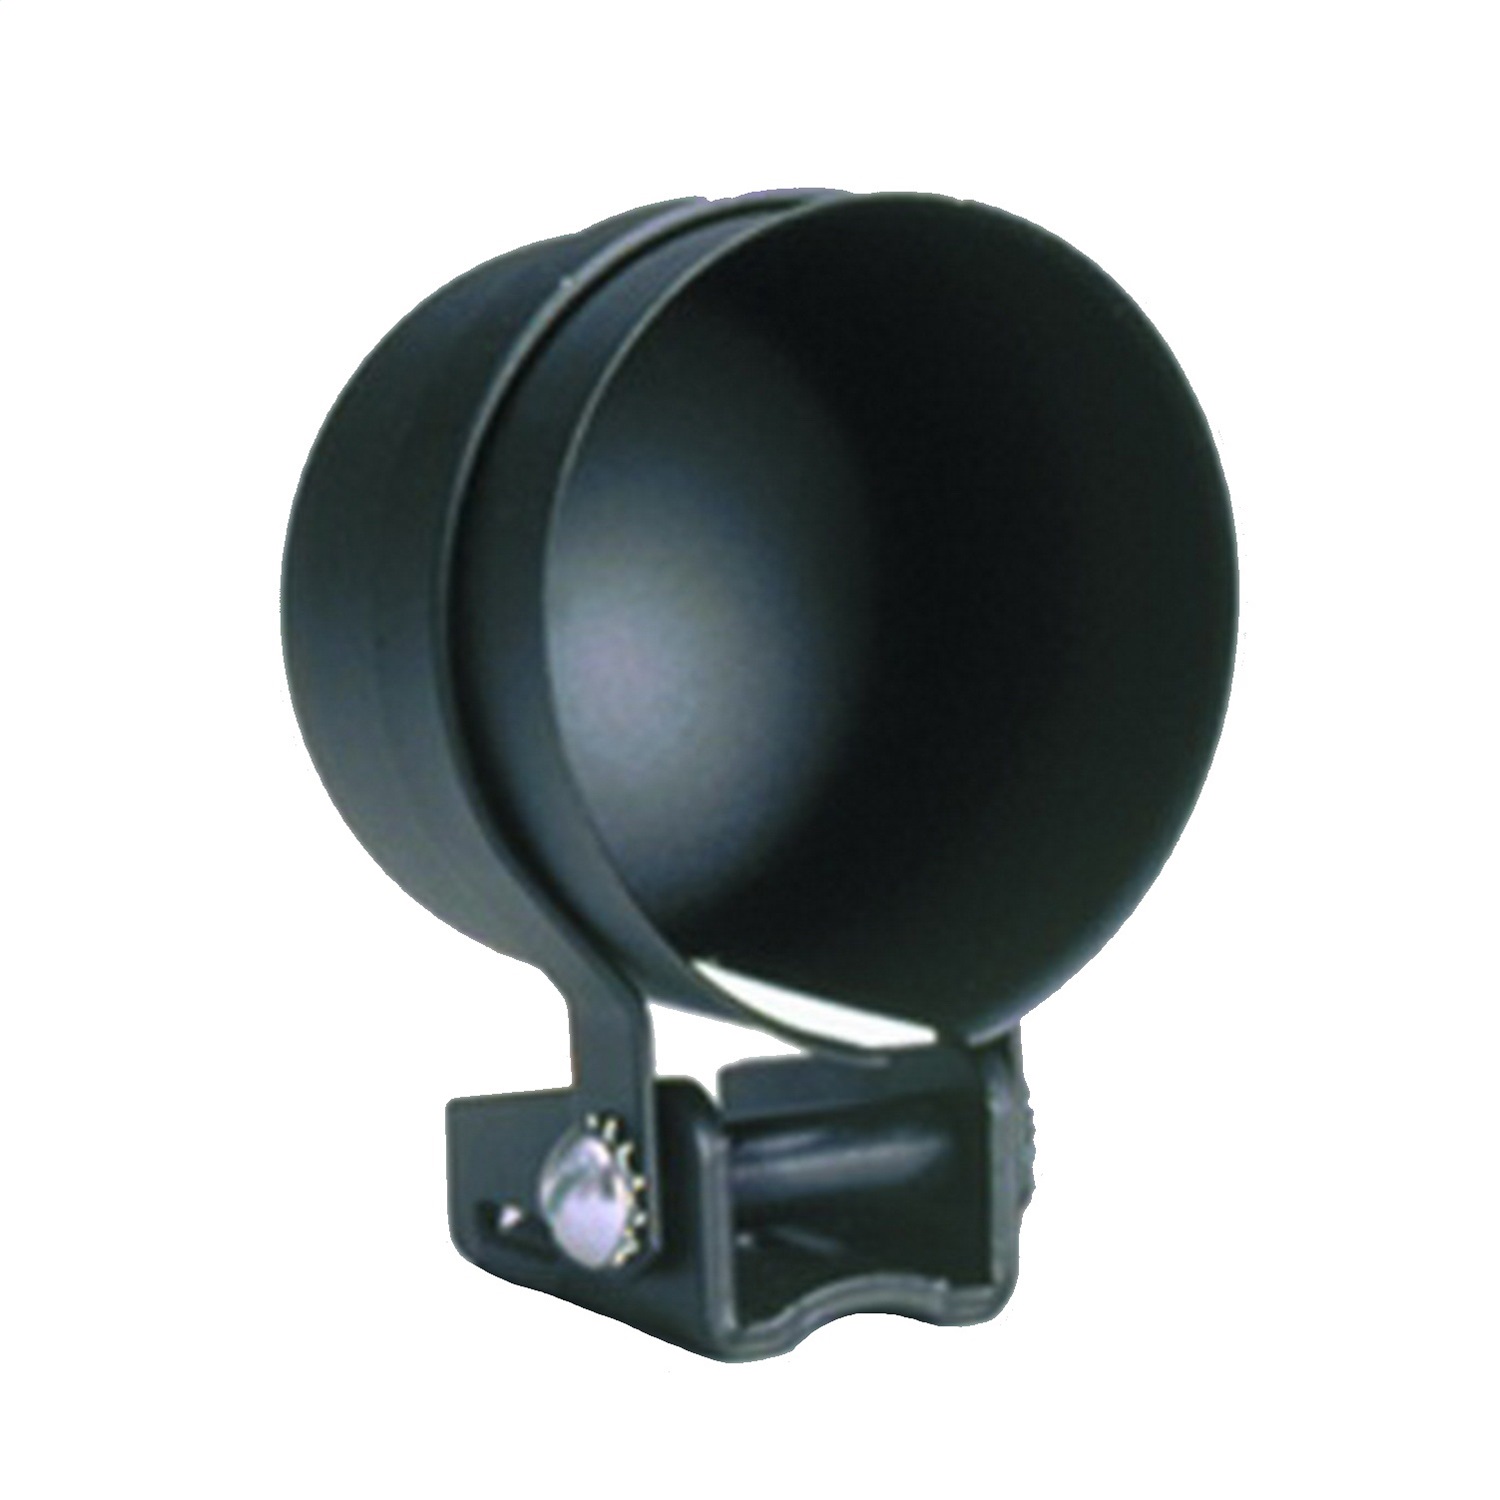 Auto Meter Auto Meter 3202 Mounting Cup